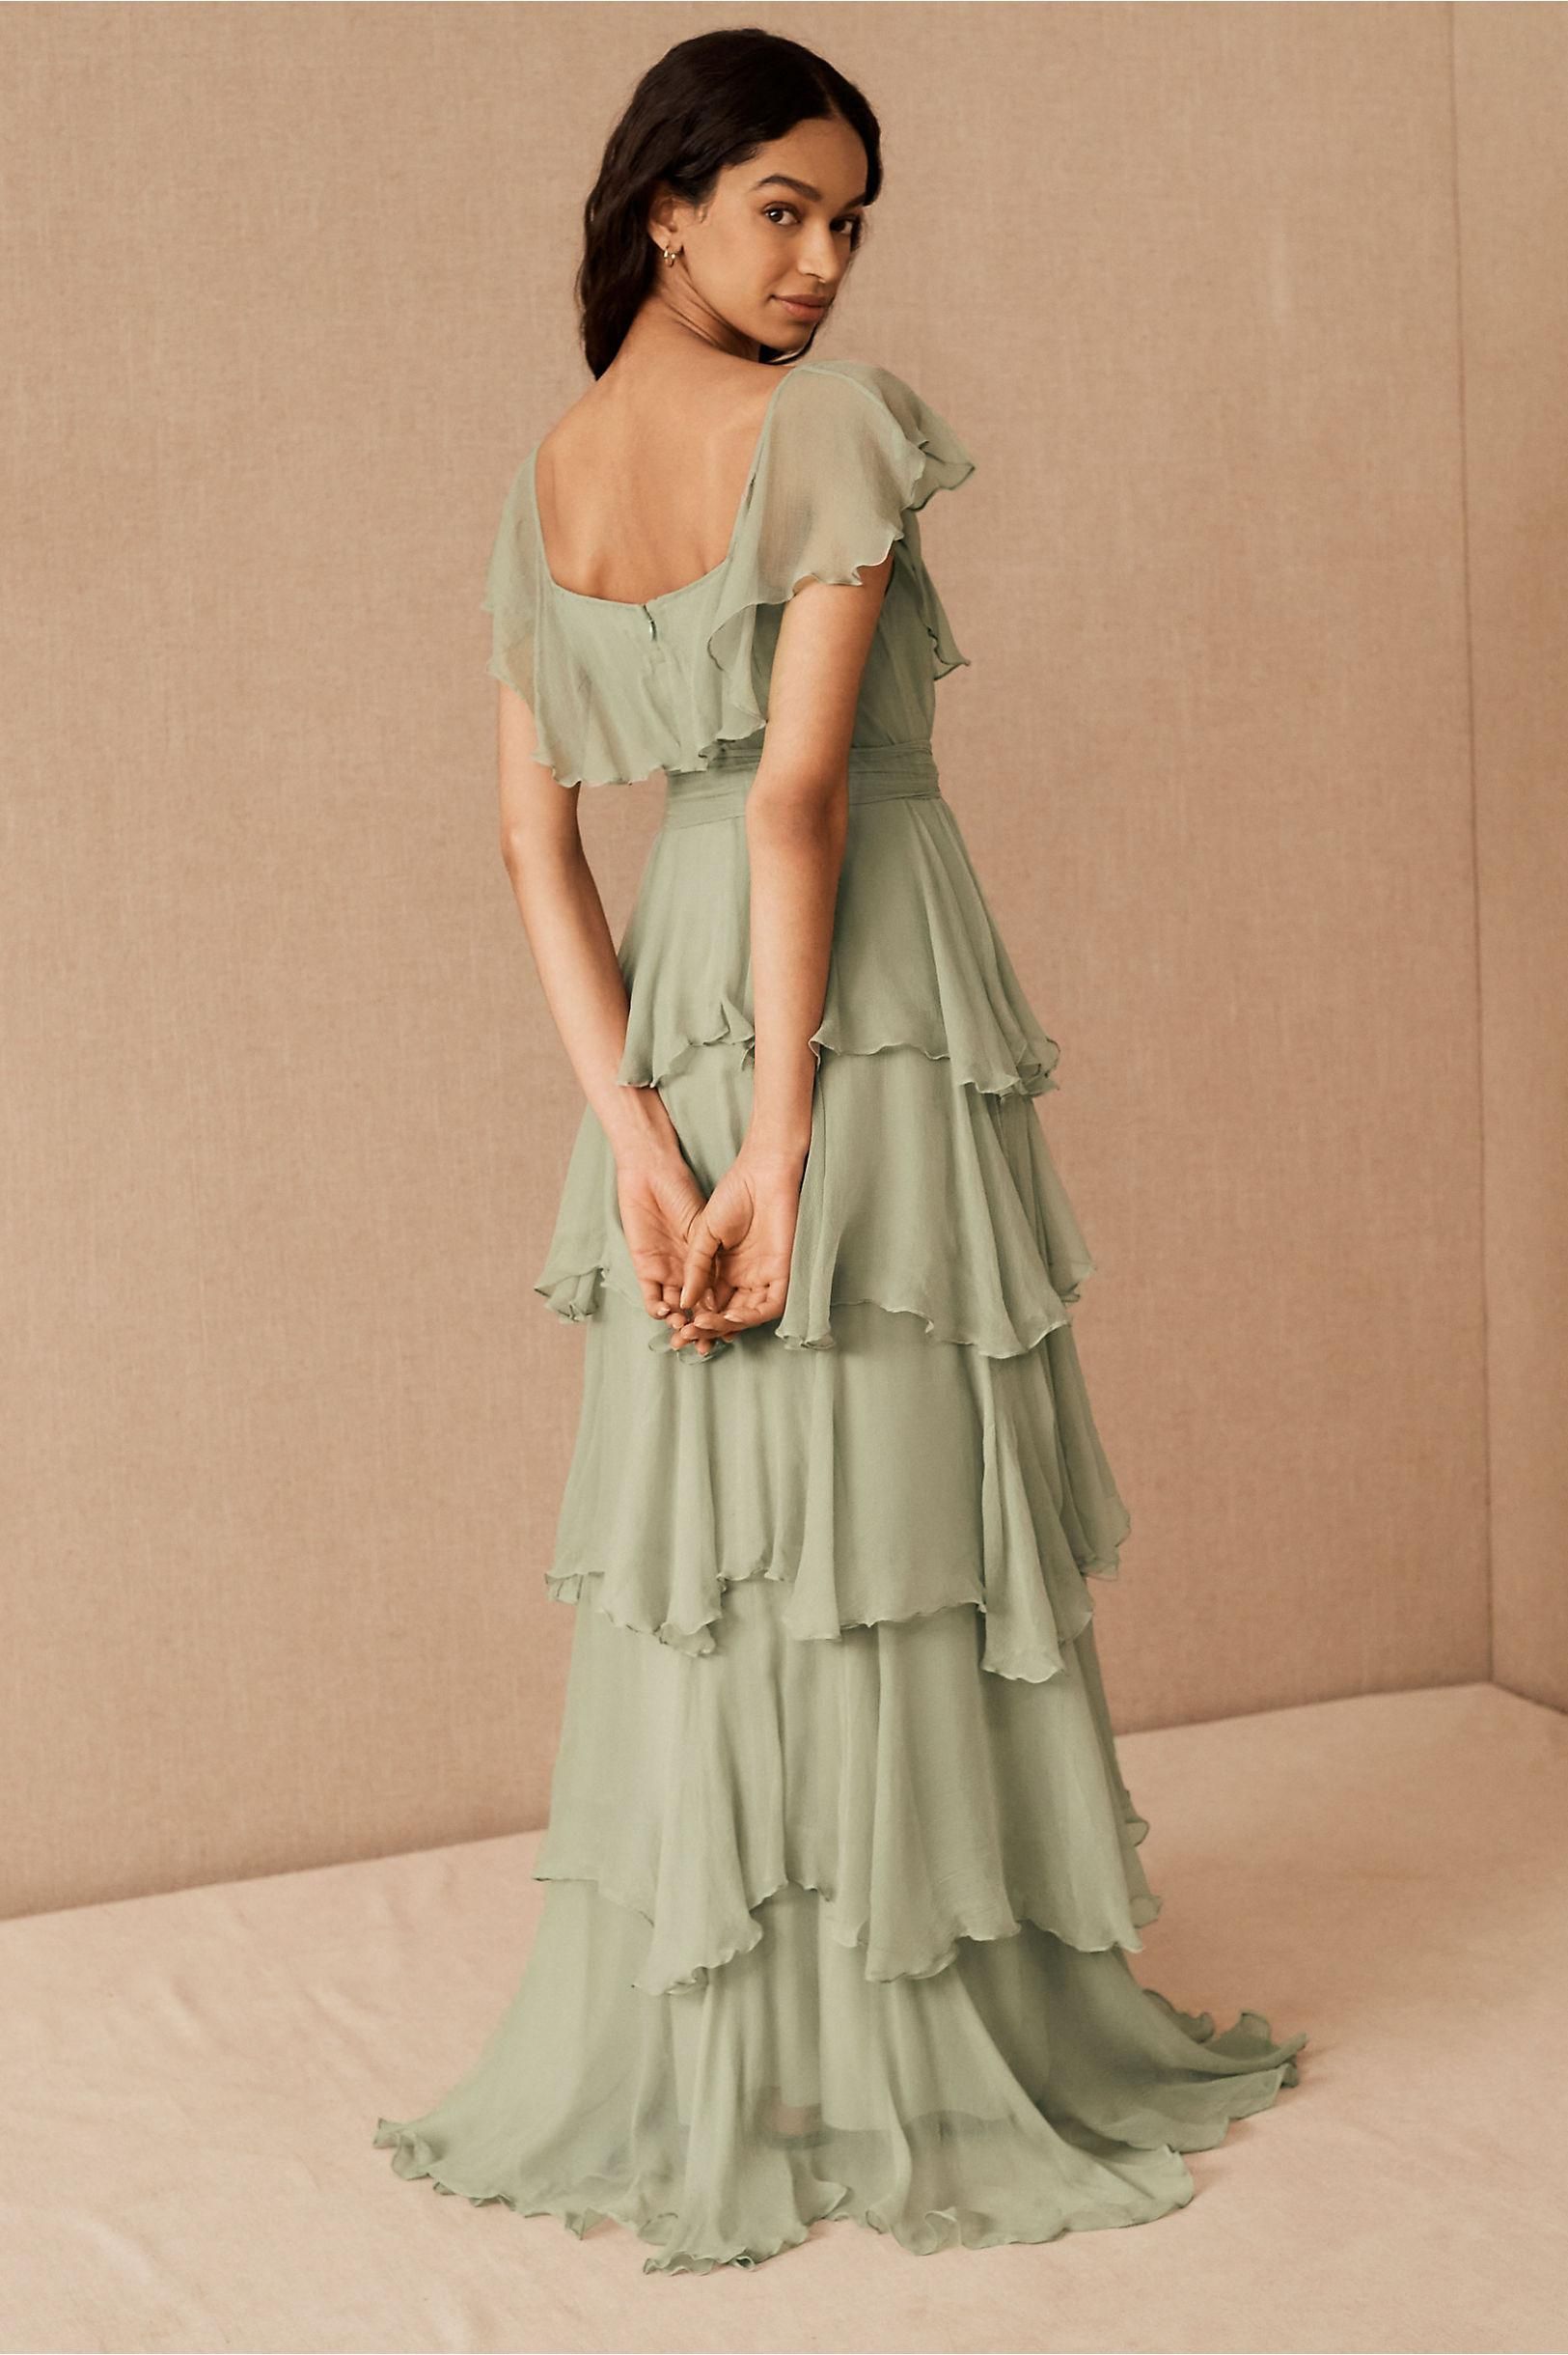 Fresh and Vibrant: Green Dress for Nature-Inspired Looks